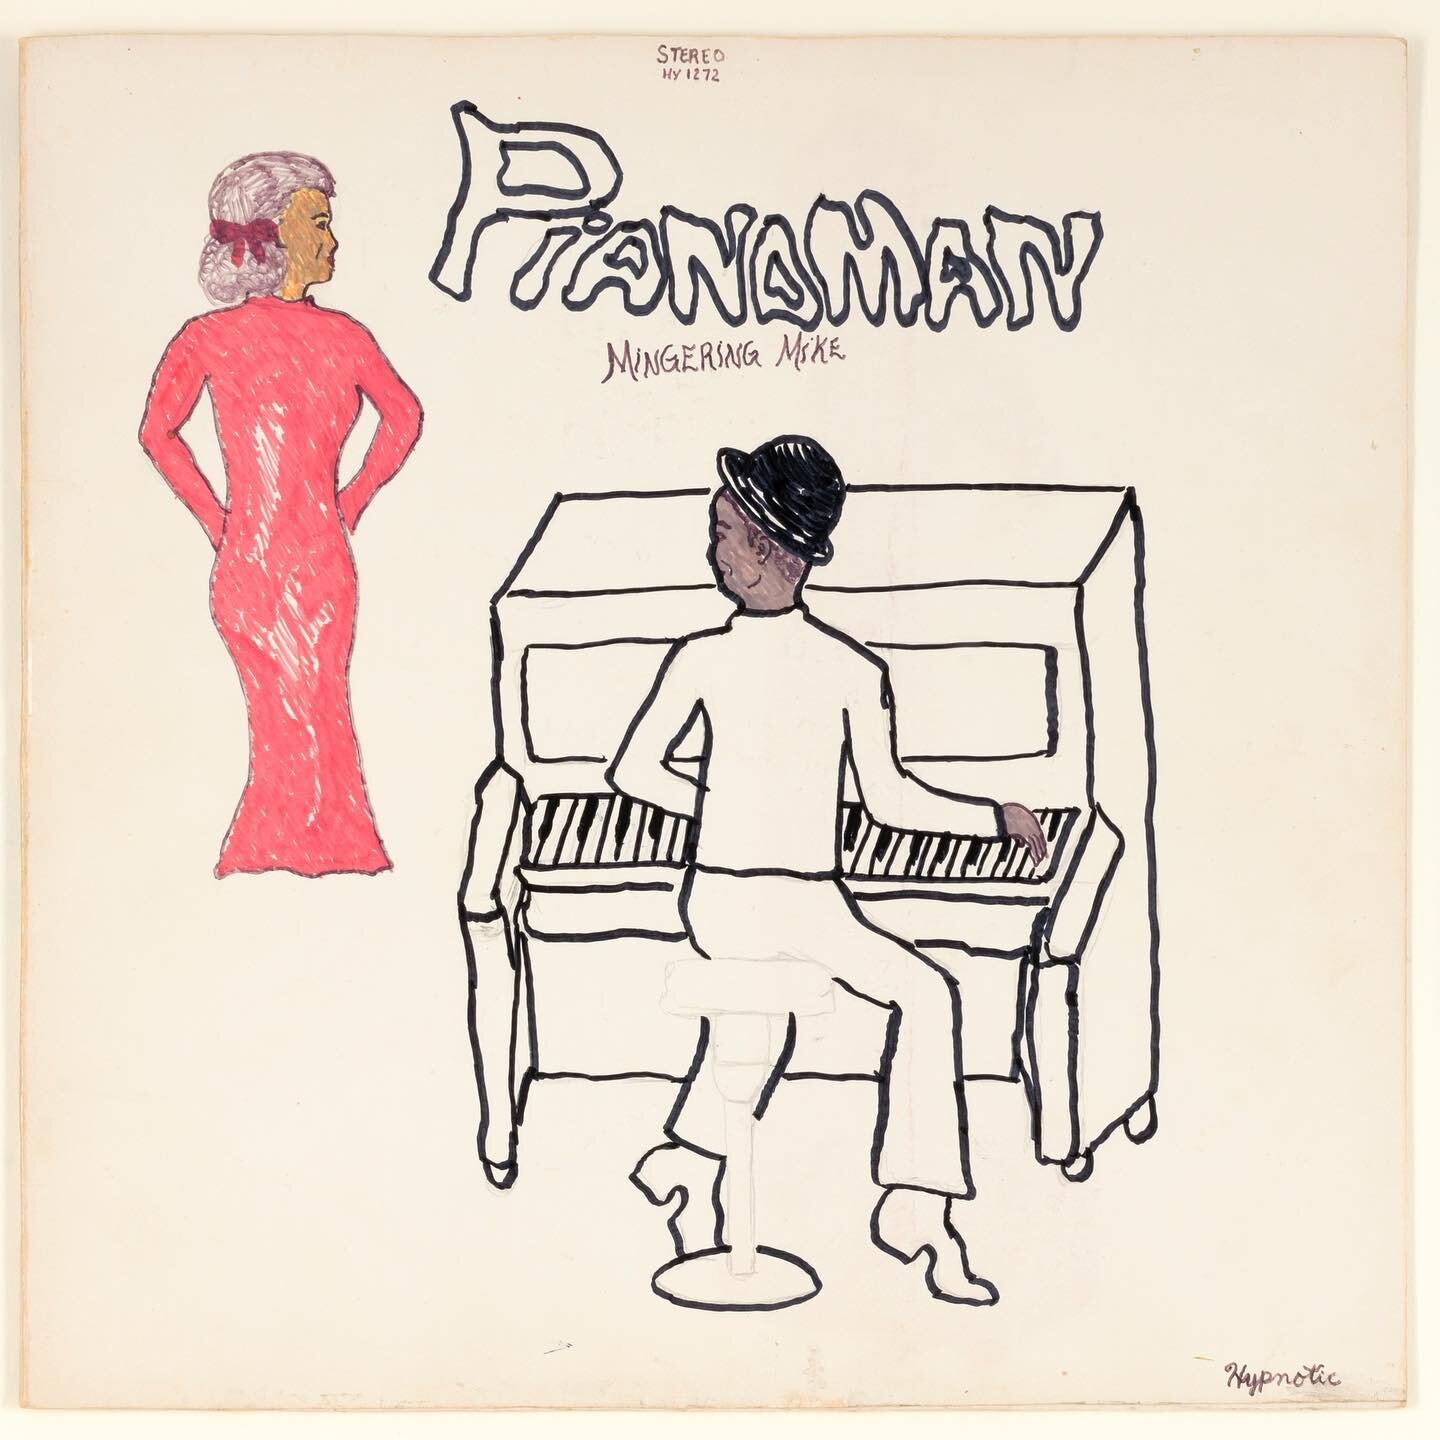 Mingering Mike - Piano Man (Hypnotic Records  12072, 1972). &copy; Mingering Mike. Smithsonian American Art Museum. Gift of Mike Wilkins and Sheila Duignan and museum purchase through the Luisita L. and Franz H. Denghausen Endowment. @hemphillartwork